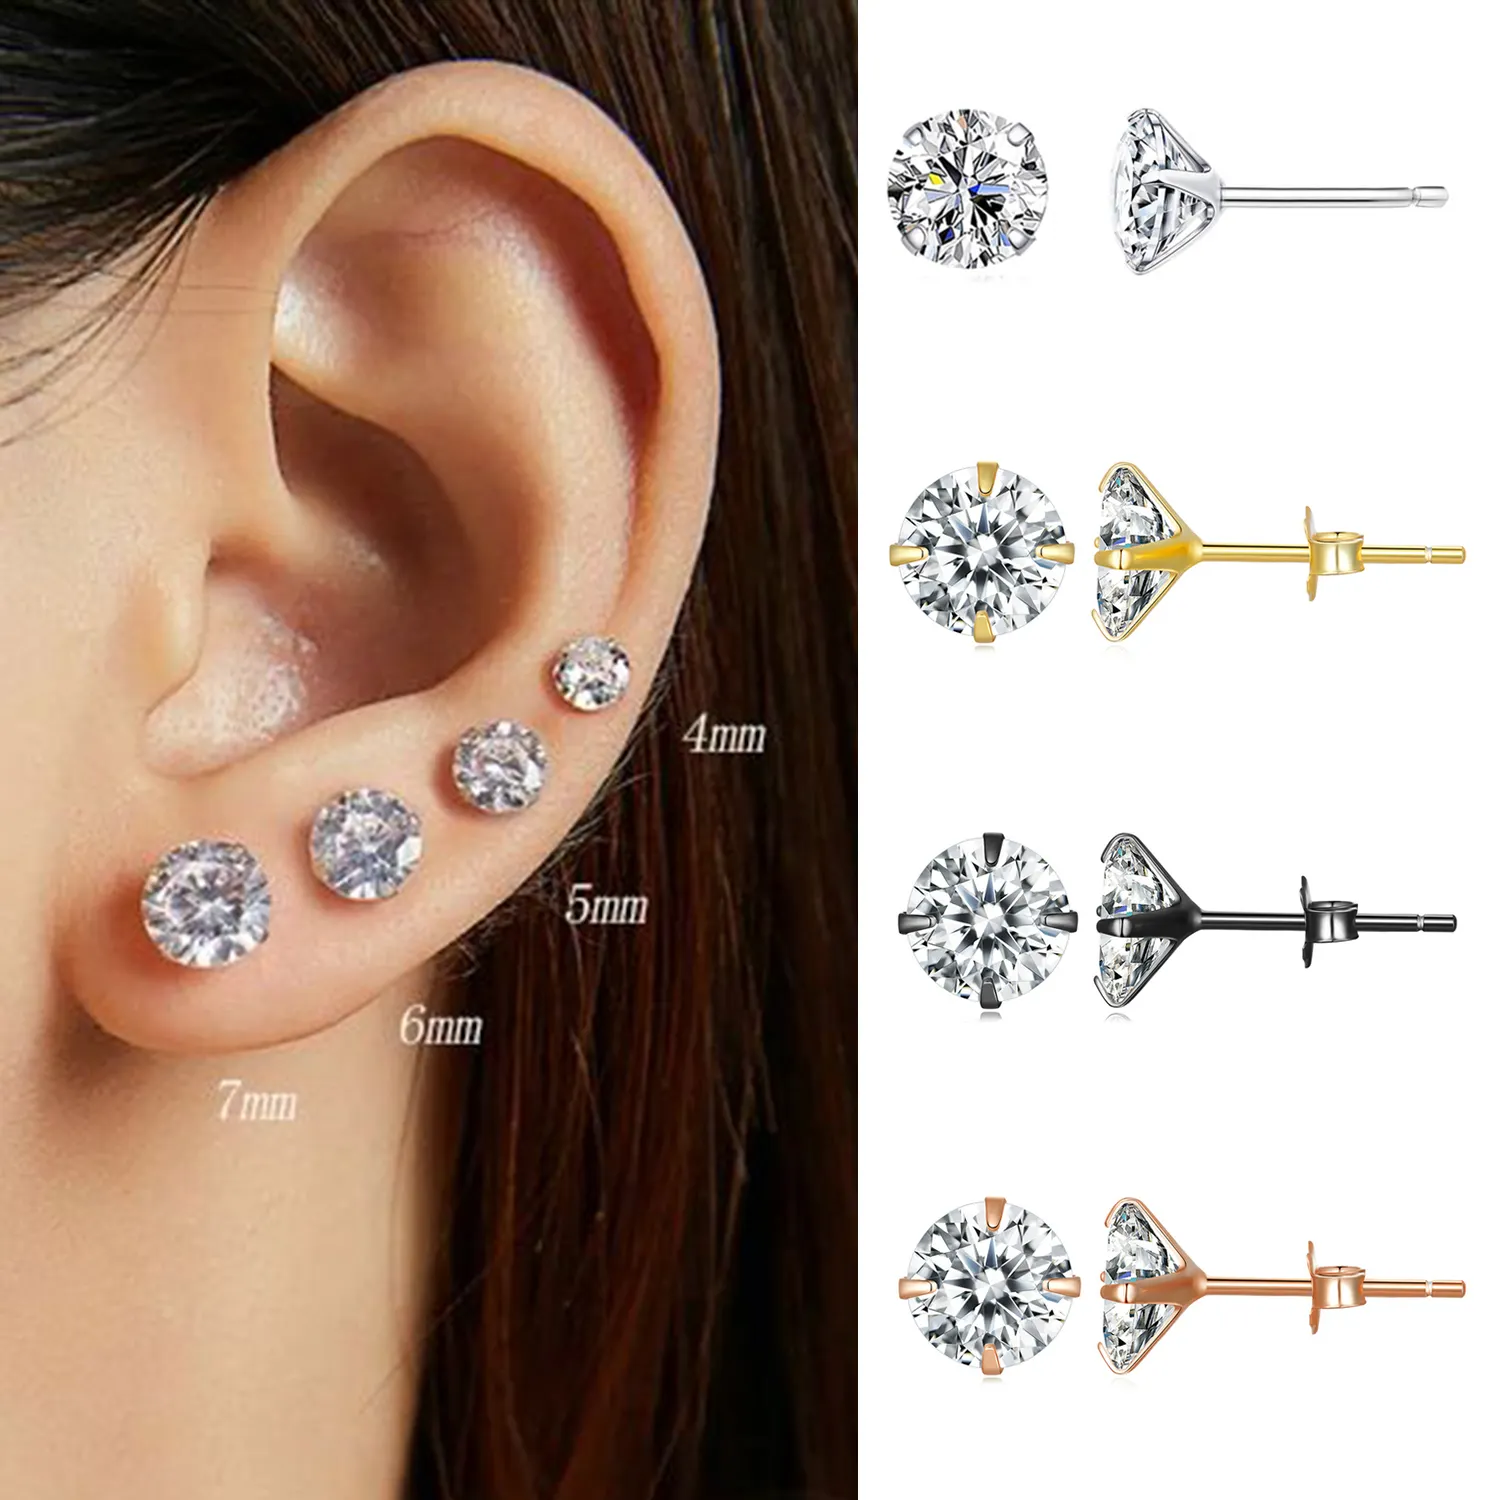 Wholesale silver earrings cheap 925 sterling silver shiny cubic zirconia ear stud rose gold plated simple earring Jiangyuan